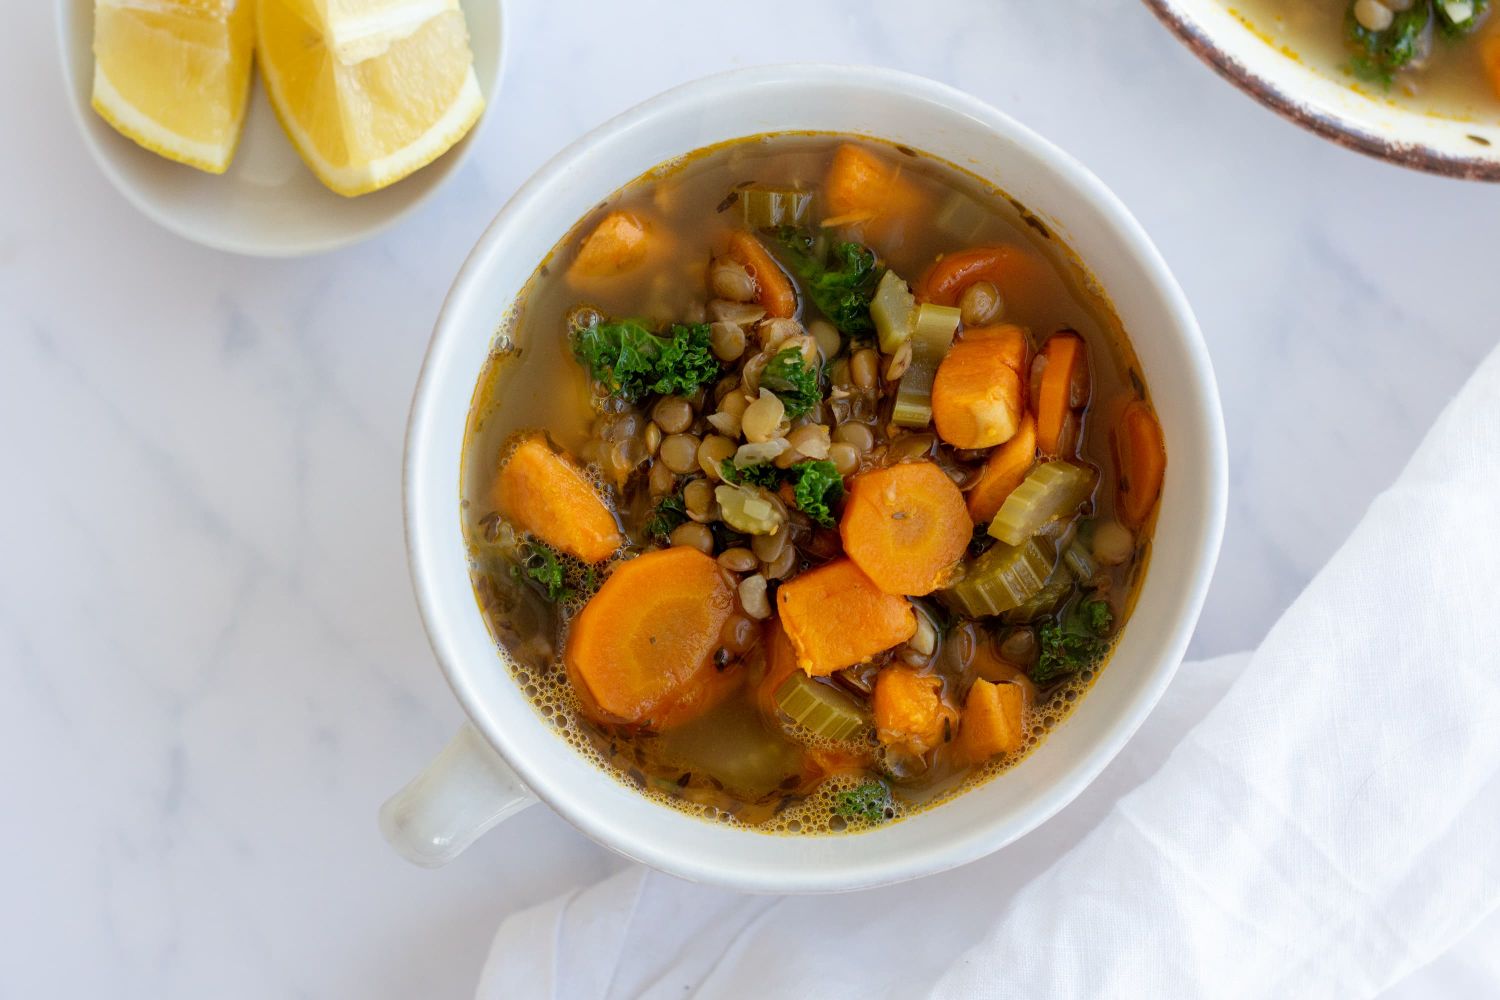 Lentil soup with cooked green lentils, carrots, onions, and celery served in a bowl with herbs,